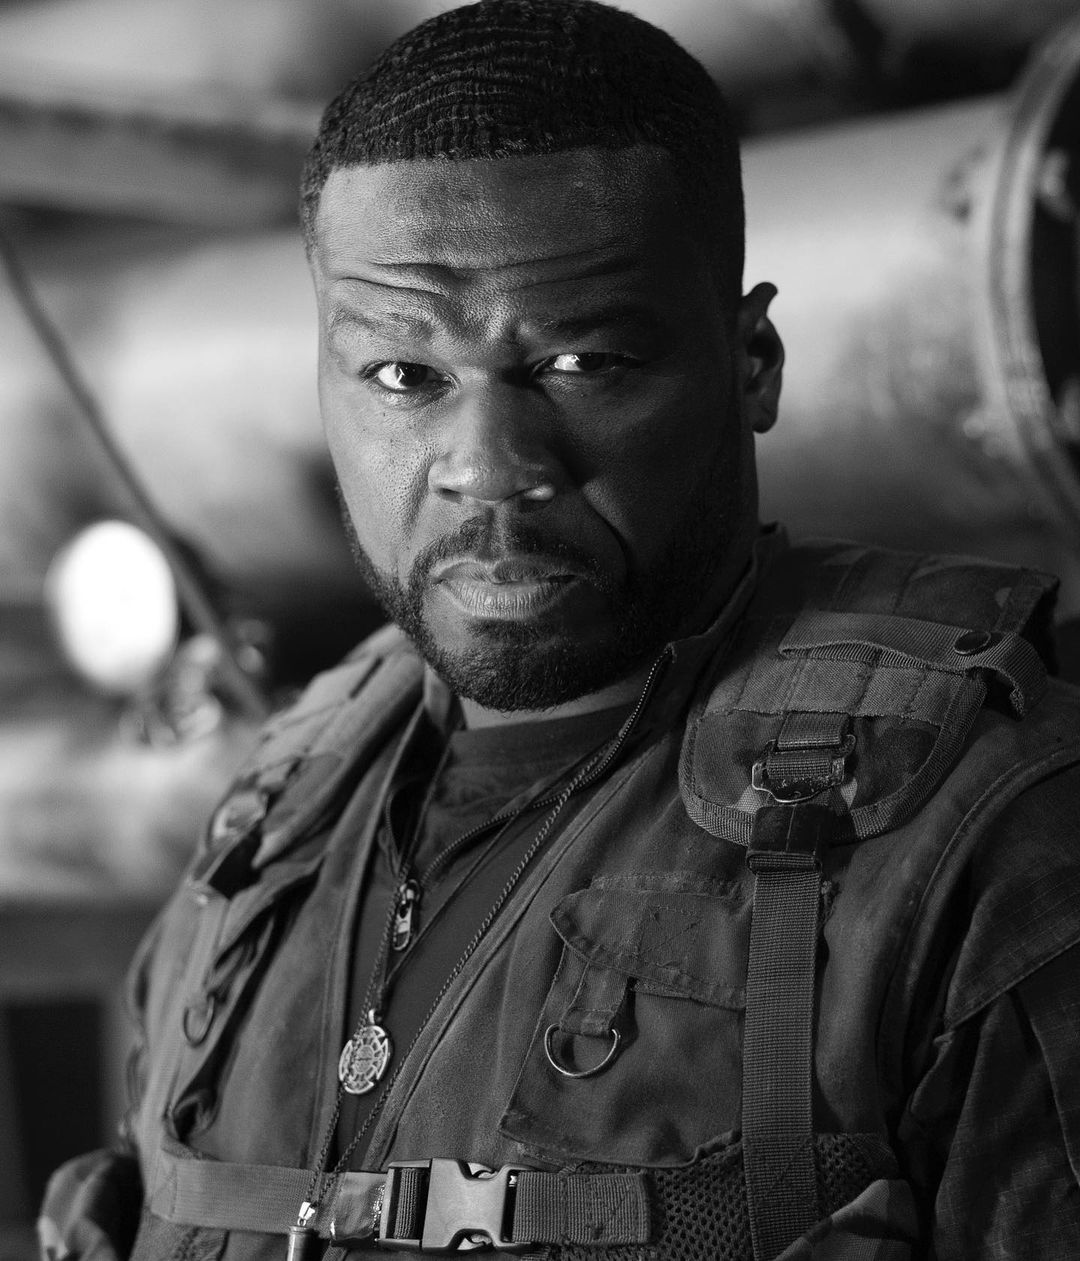 @50cent On top of his game. On top of every game! There is no other I can think of that can crossover music and film with such credibility. It’s a privilege to work with the powerhouse that he is. Massive respect and appreciation for all that you do
#expendables4
????@danielsmithphotography